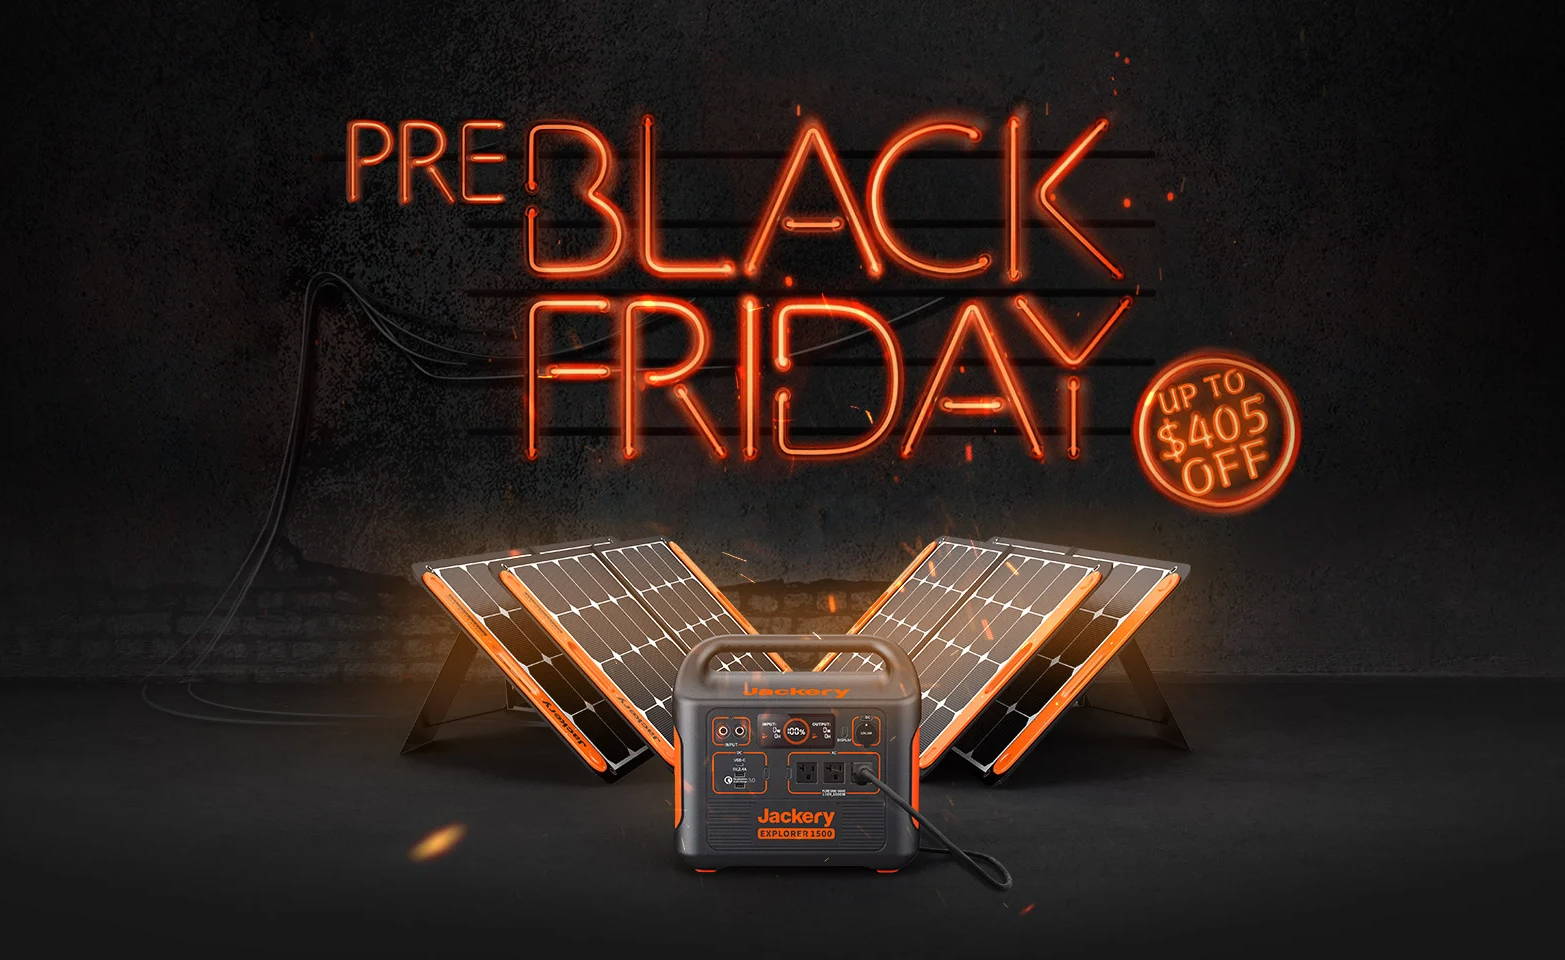 Pre Black Friday Jackery Deals Explorer 1500 with Solar Panels, 1000 and 1000 with Solar Panels  Up to $405 Off or $225 off or $180 Off Good From 11-14 to 11-18